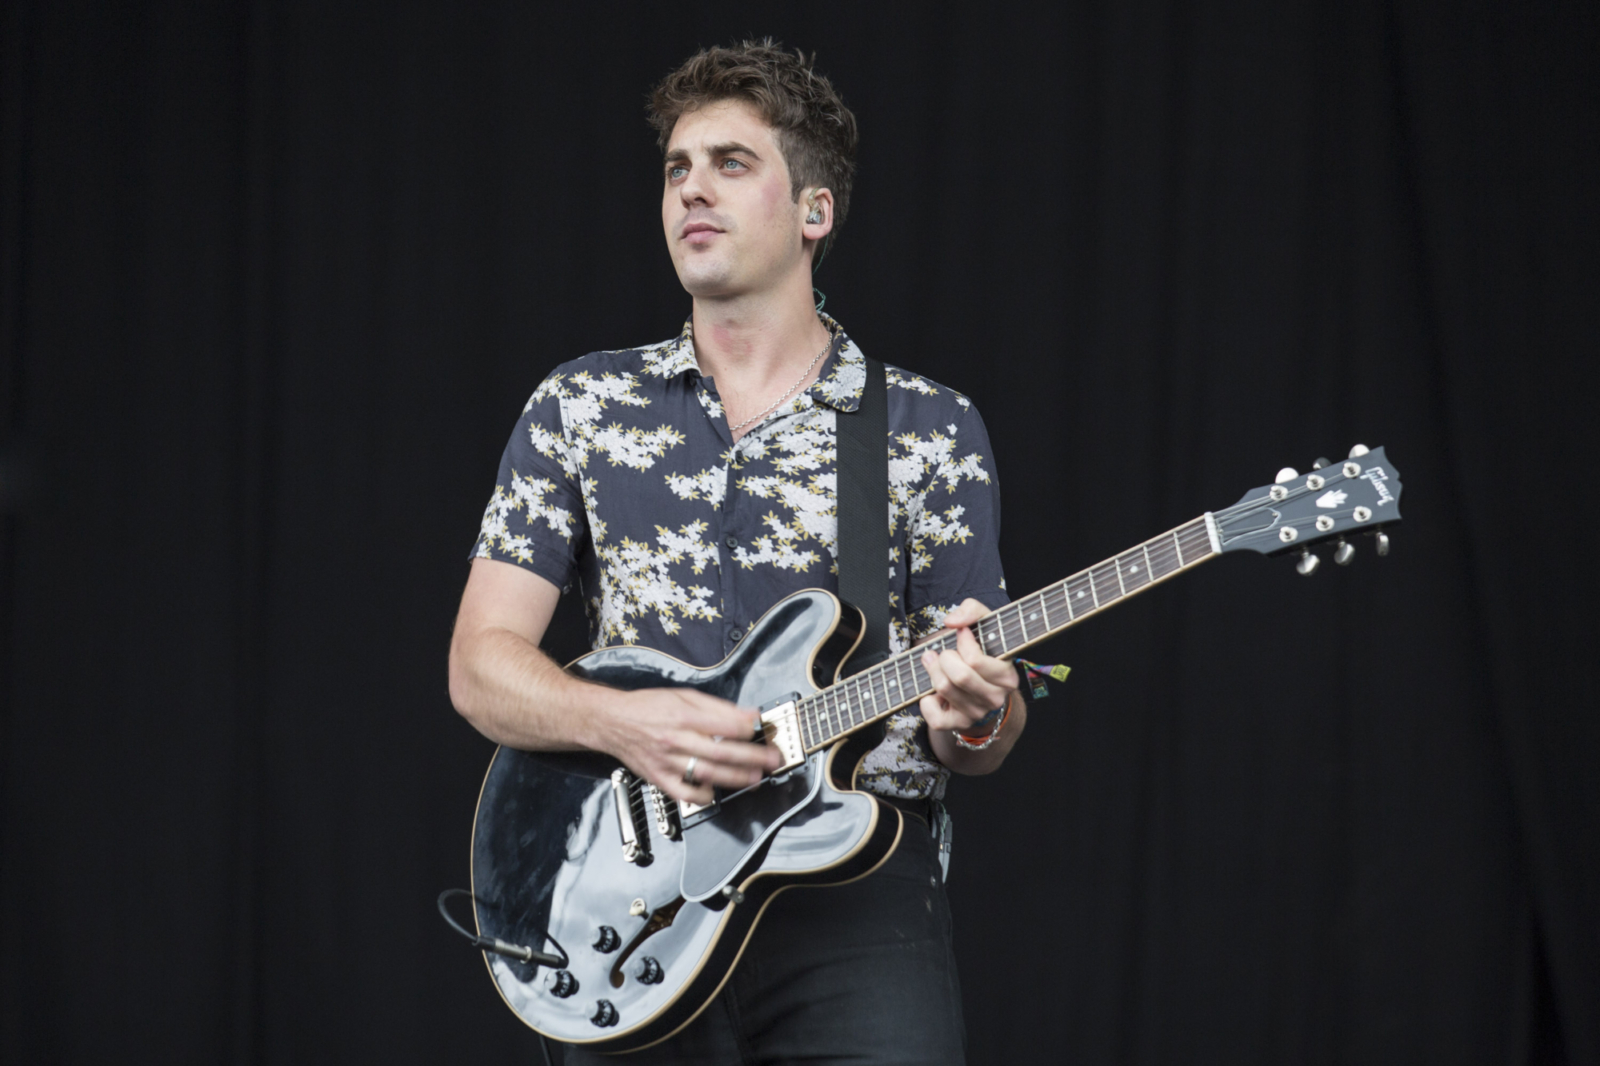 Circa Waves, The Horrors and more are headed to Live At Leeds 2018